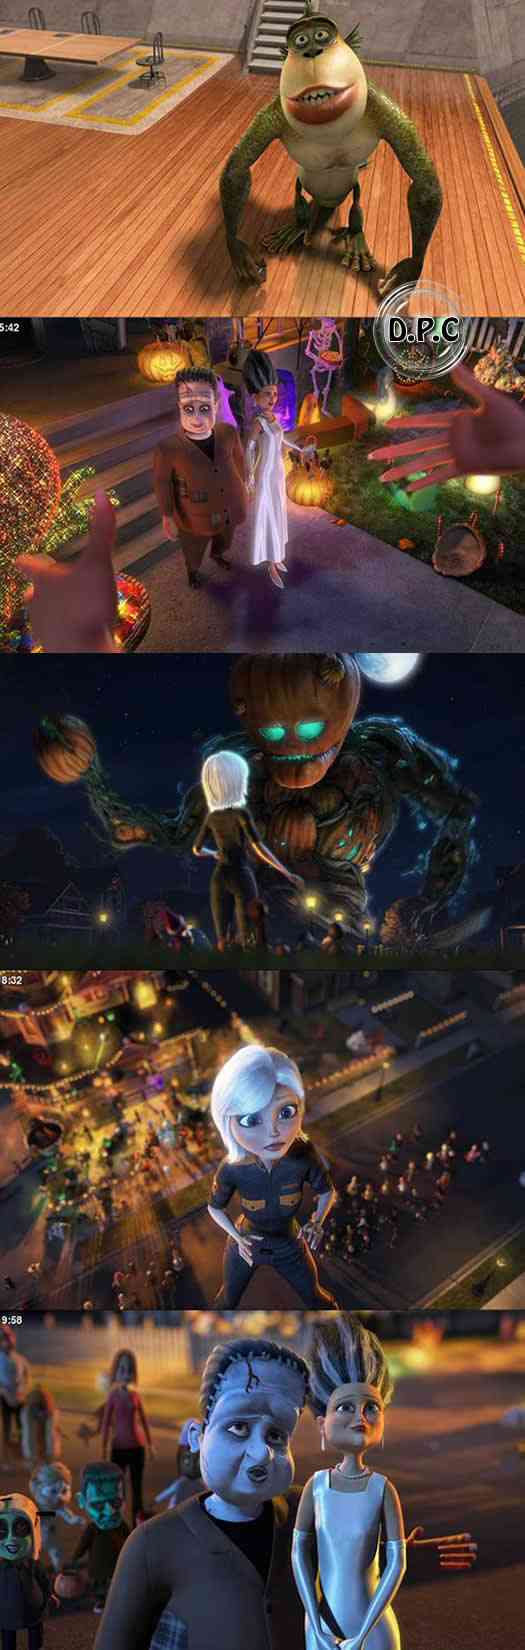 Monsters vs. Aliens Mutant Pumpkins from Outer Space DVDRip Latino DPC